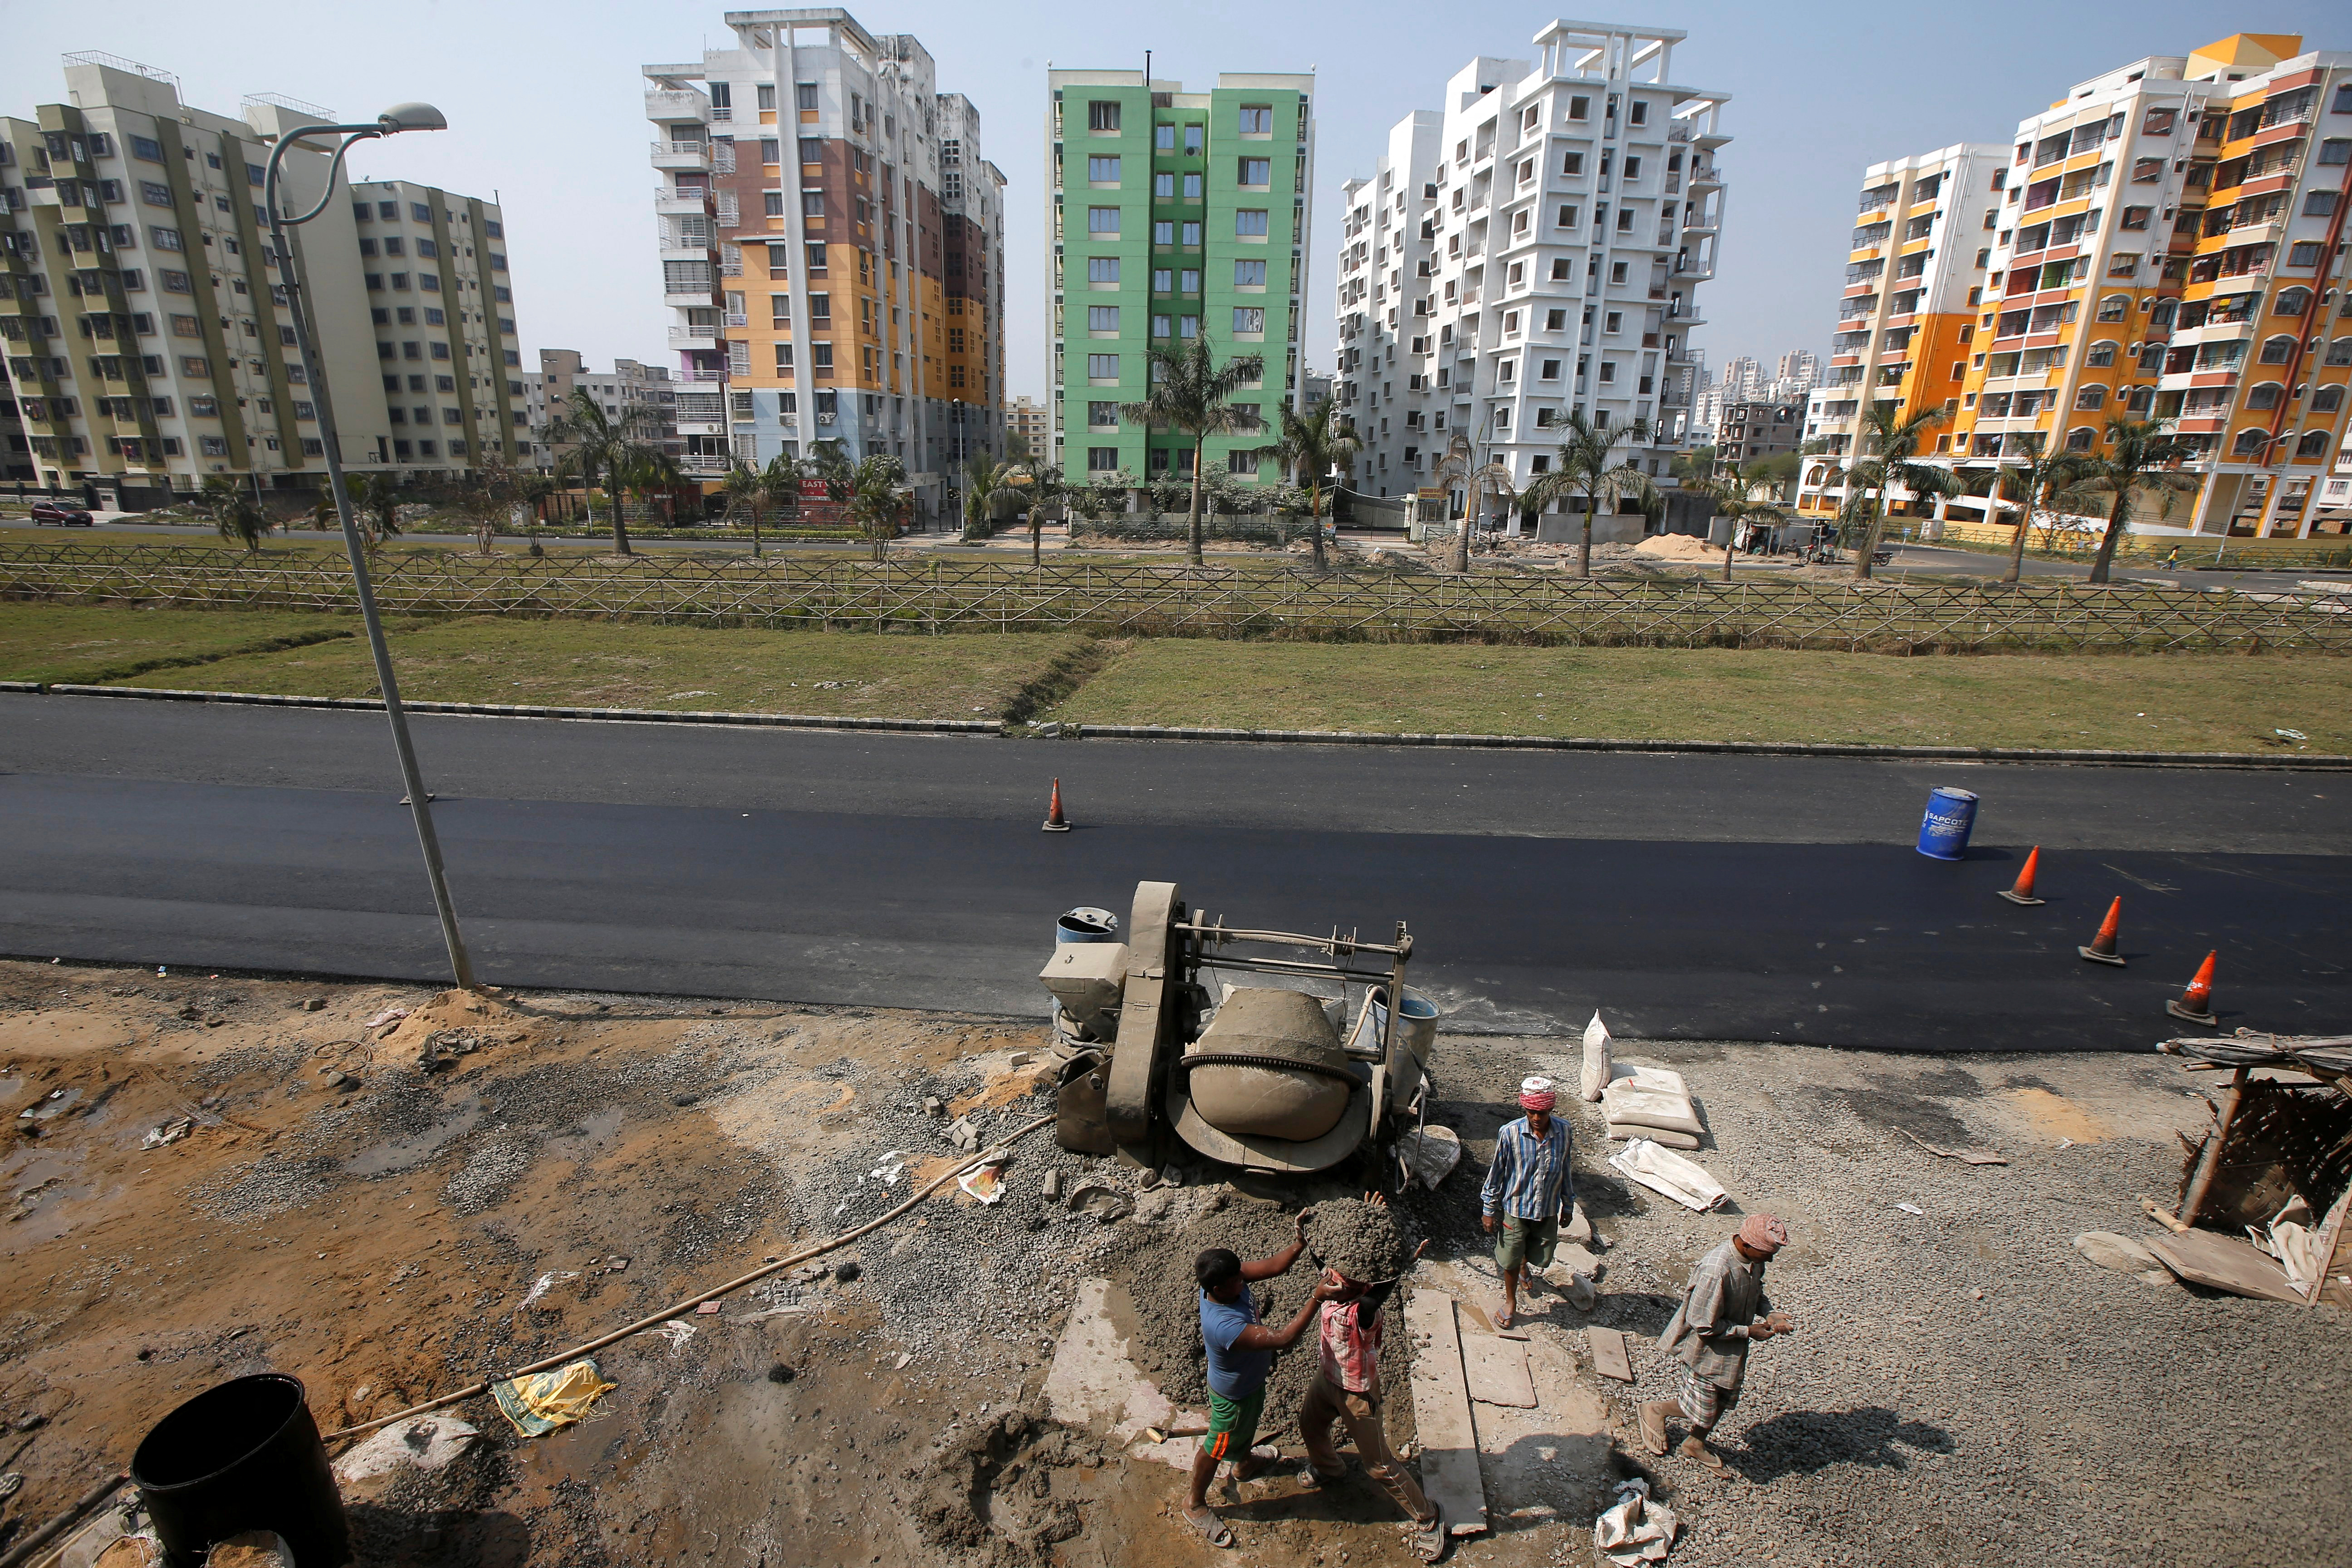 Labourers work at the construction site of a residential complex on the outskirts of Kolkata